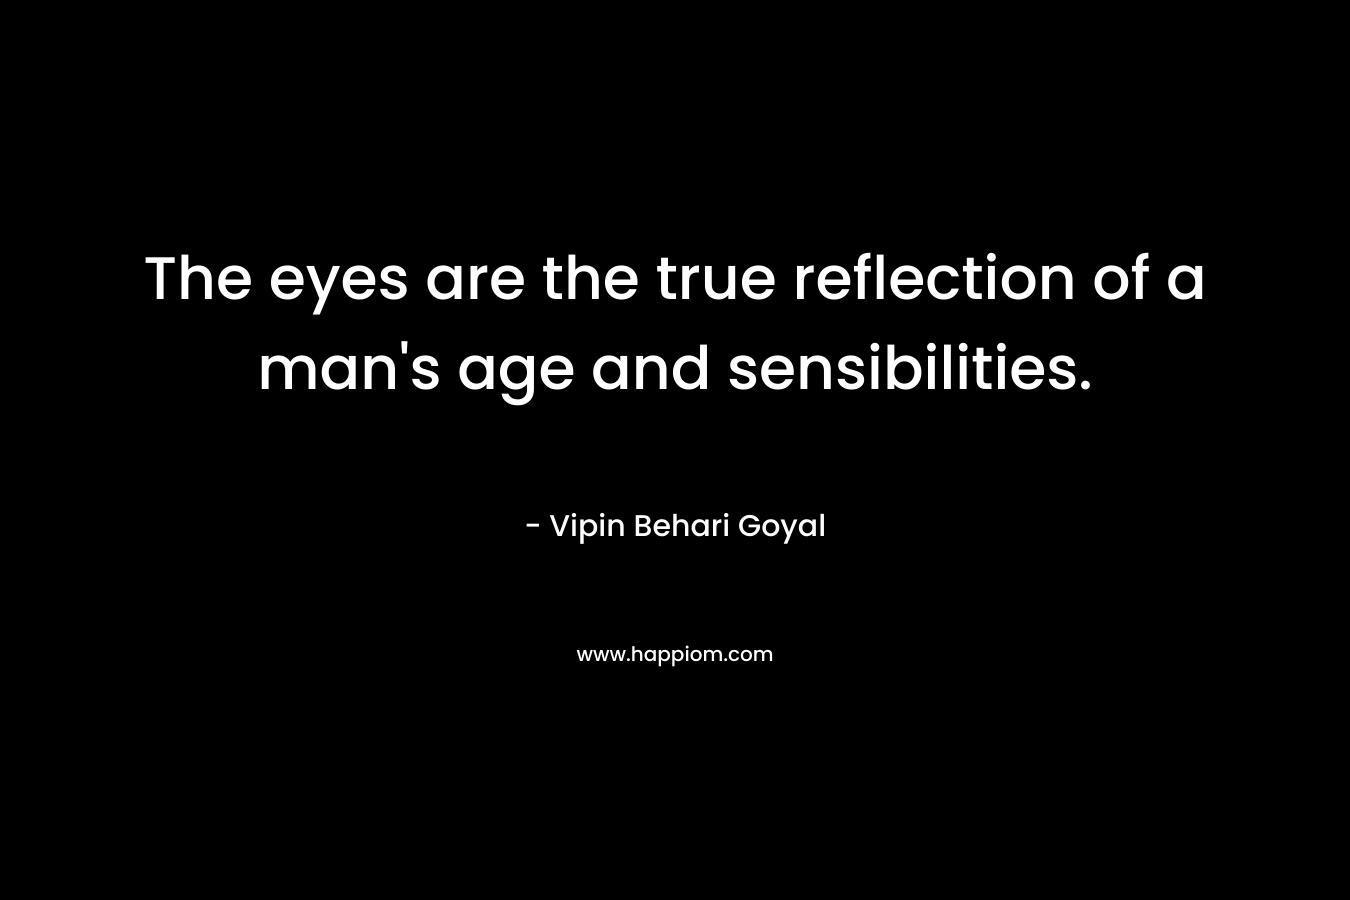 The eyes are the true reflection of a man’s age and sensibilities. – Vipin Behari Goyal